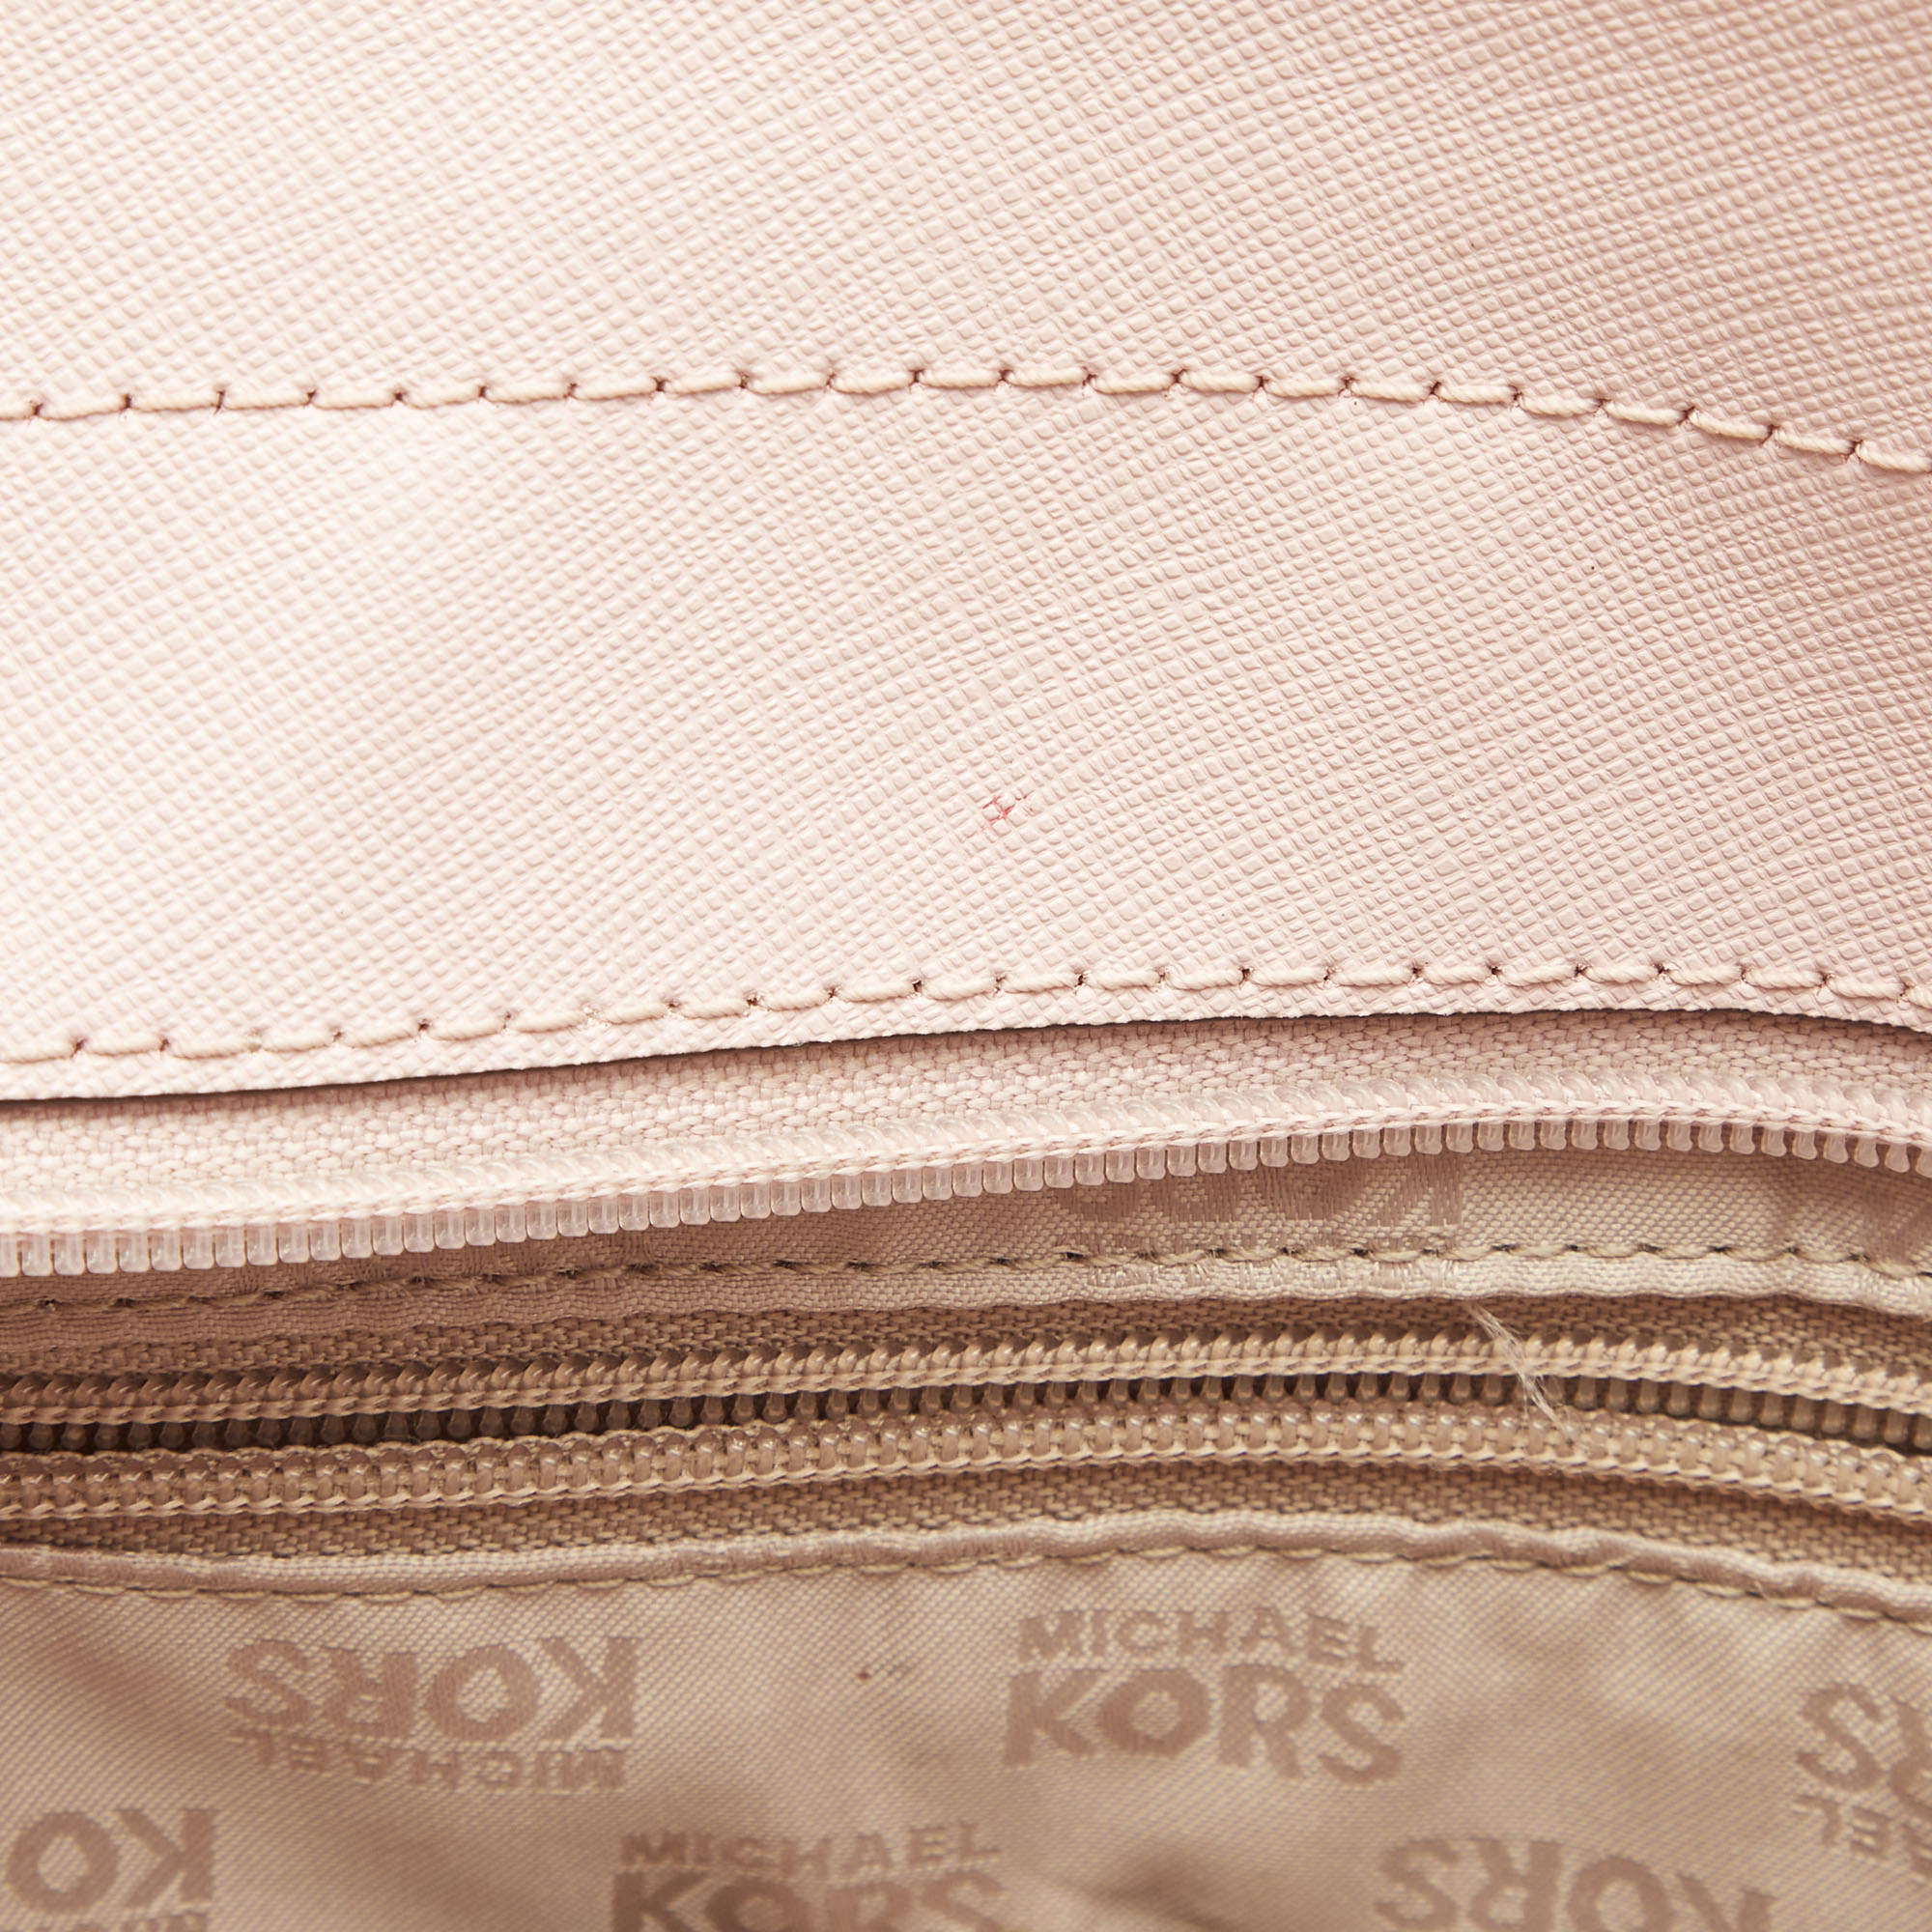 Michael Kors - Authenticated Jet Set Travel Bag - Leather Pink Plain for Women, Never Worn, with Tag